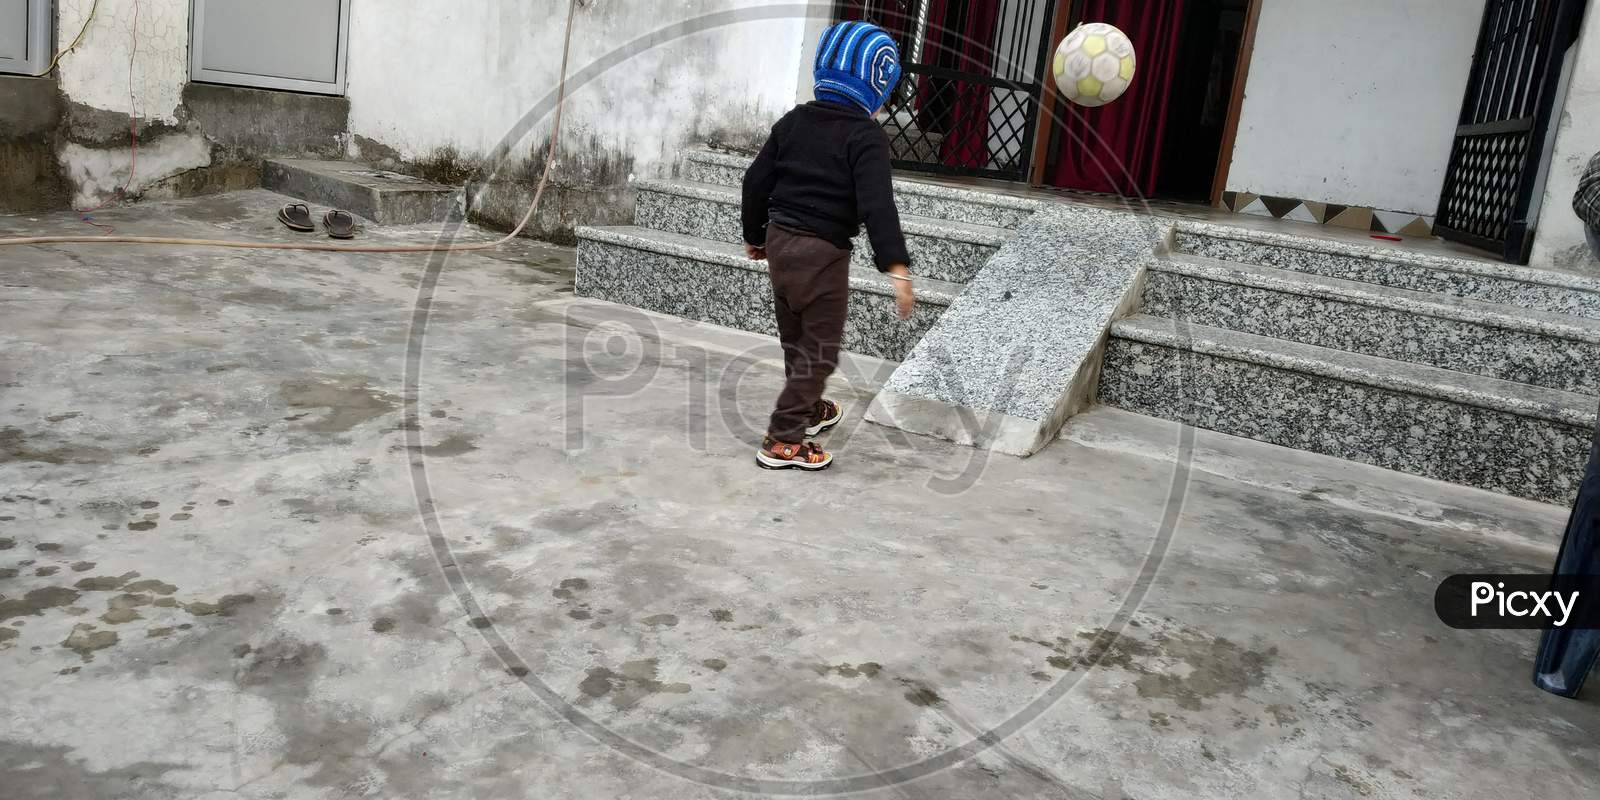 A kid playing with his football